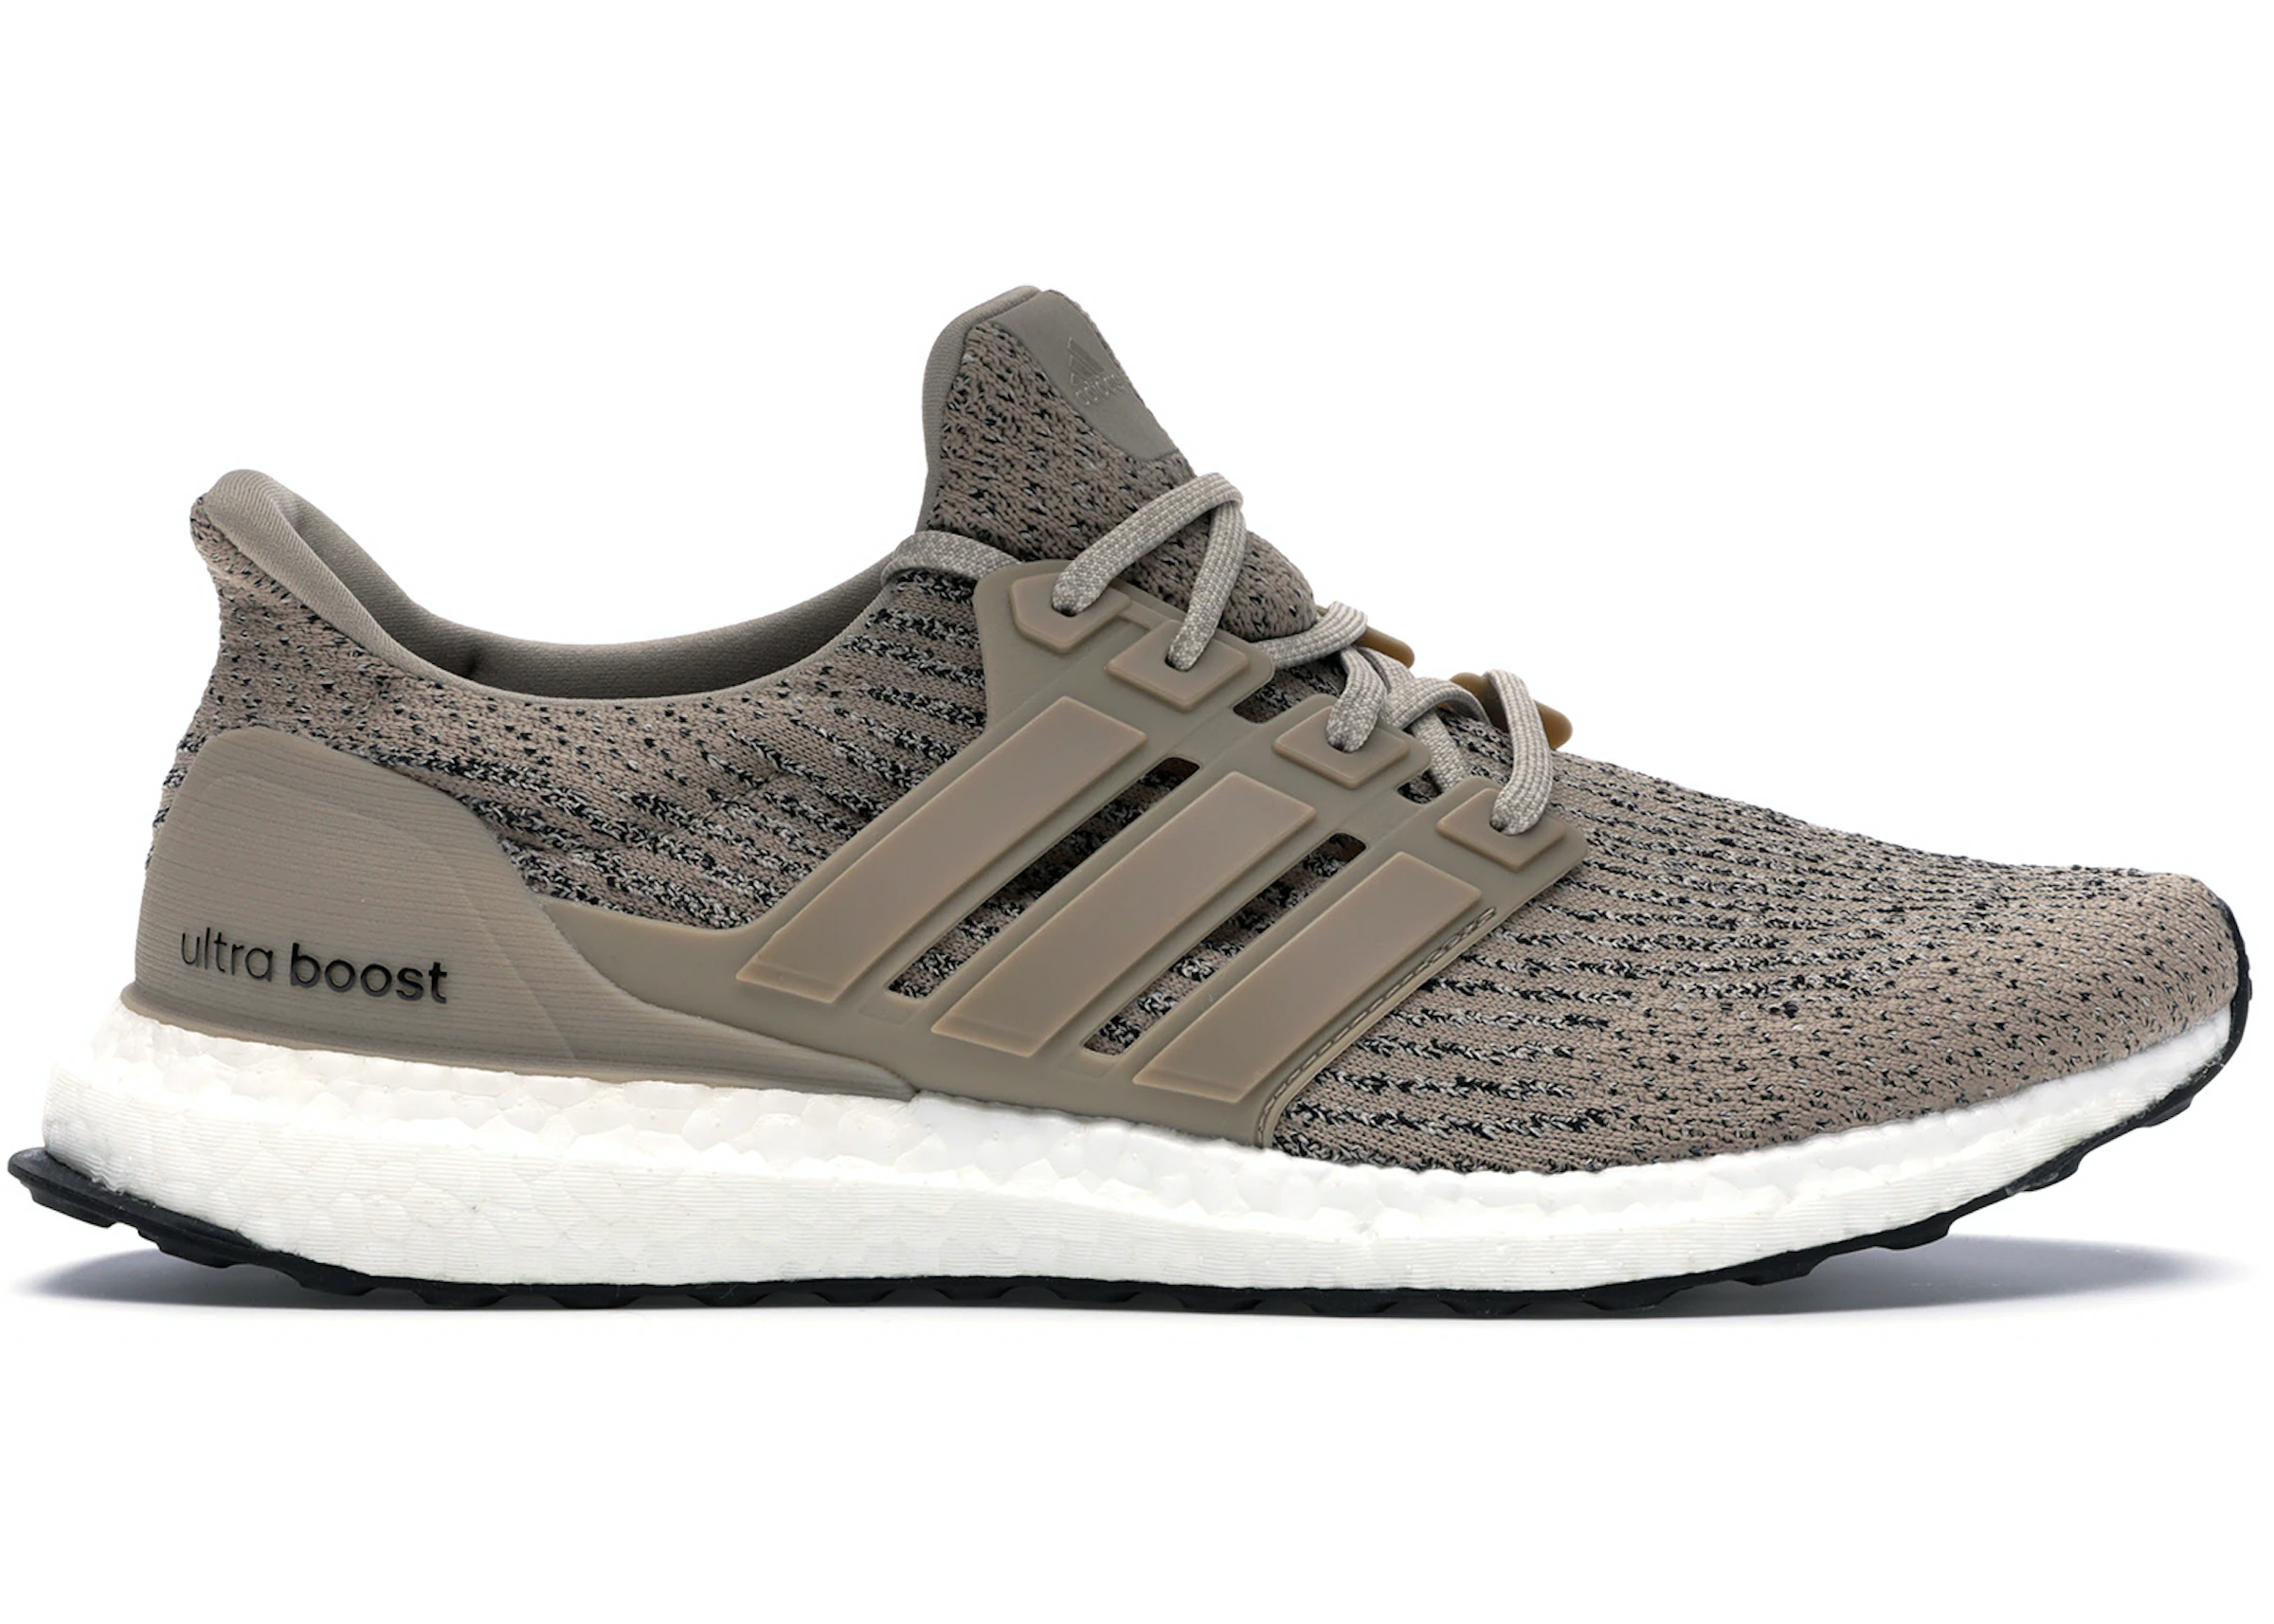 Dalset Vreemdeling Staat Buy adidas Ultra Boost 3.0 Shoes & New Sneakers - StockX